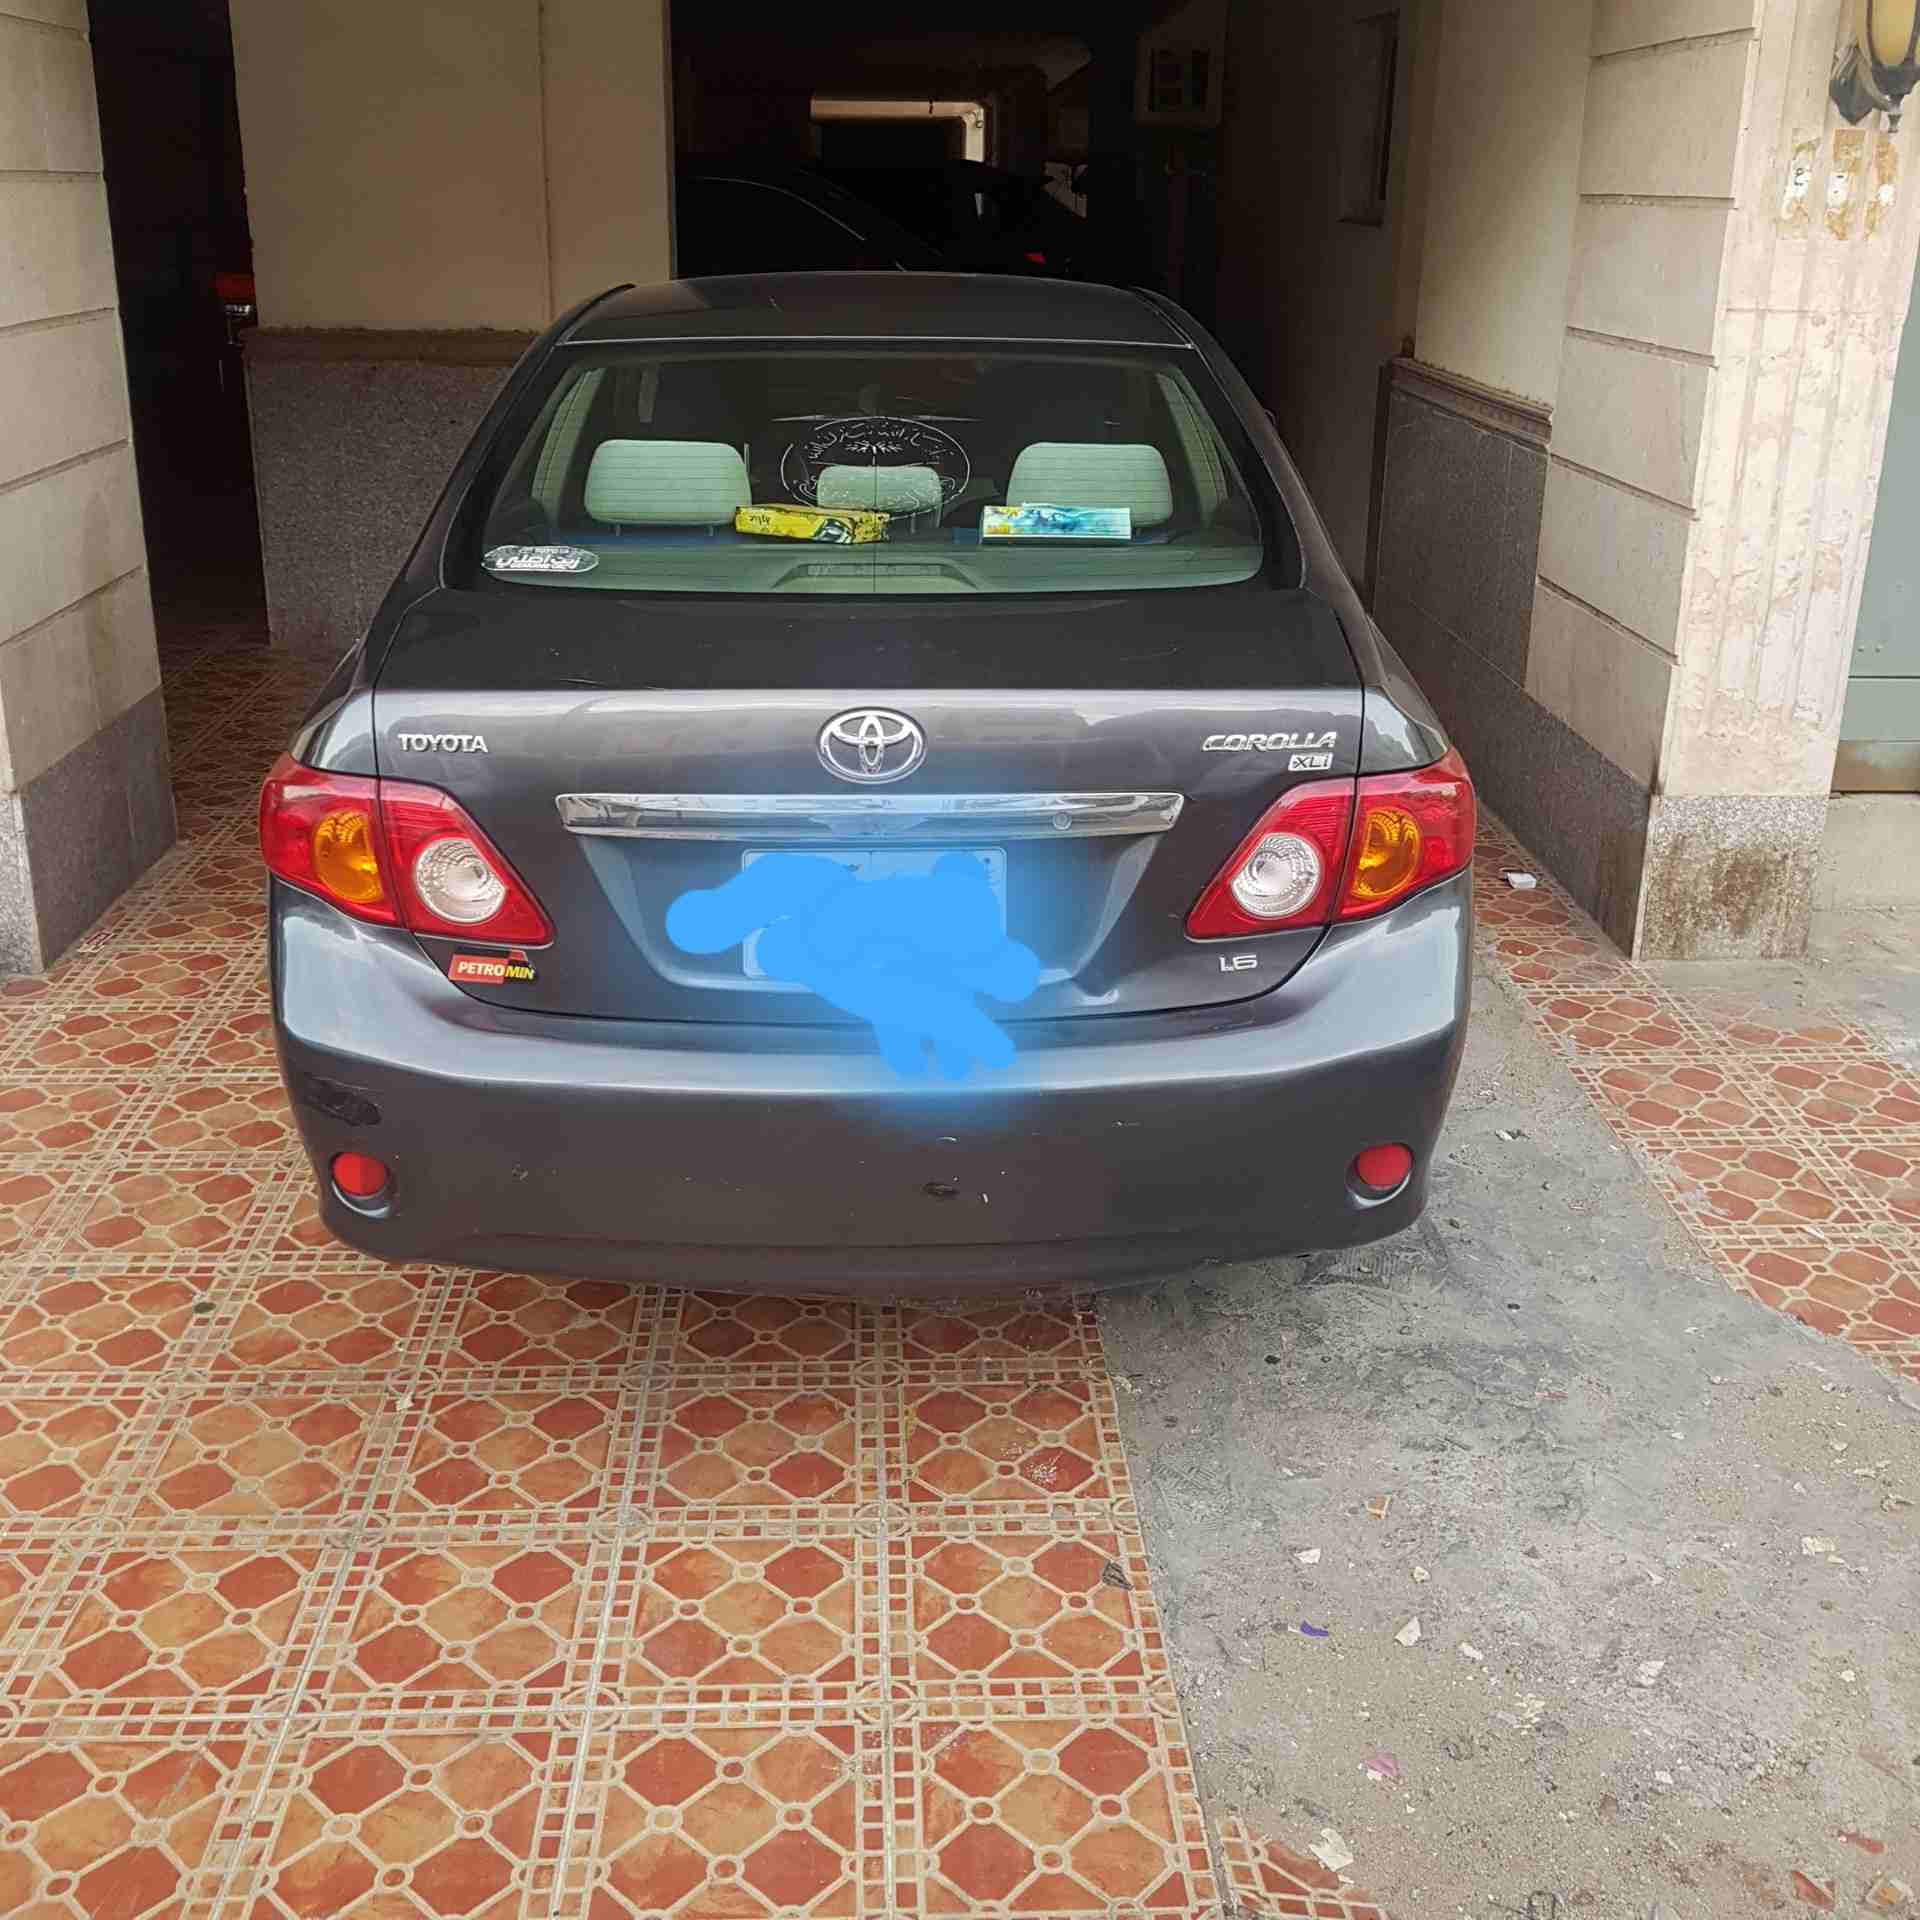 the bike is in excellent working condition very clean an new , whats app.....+971556543345-  i want to sell my corolla...